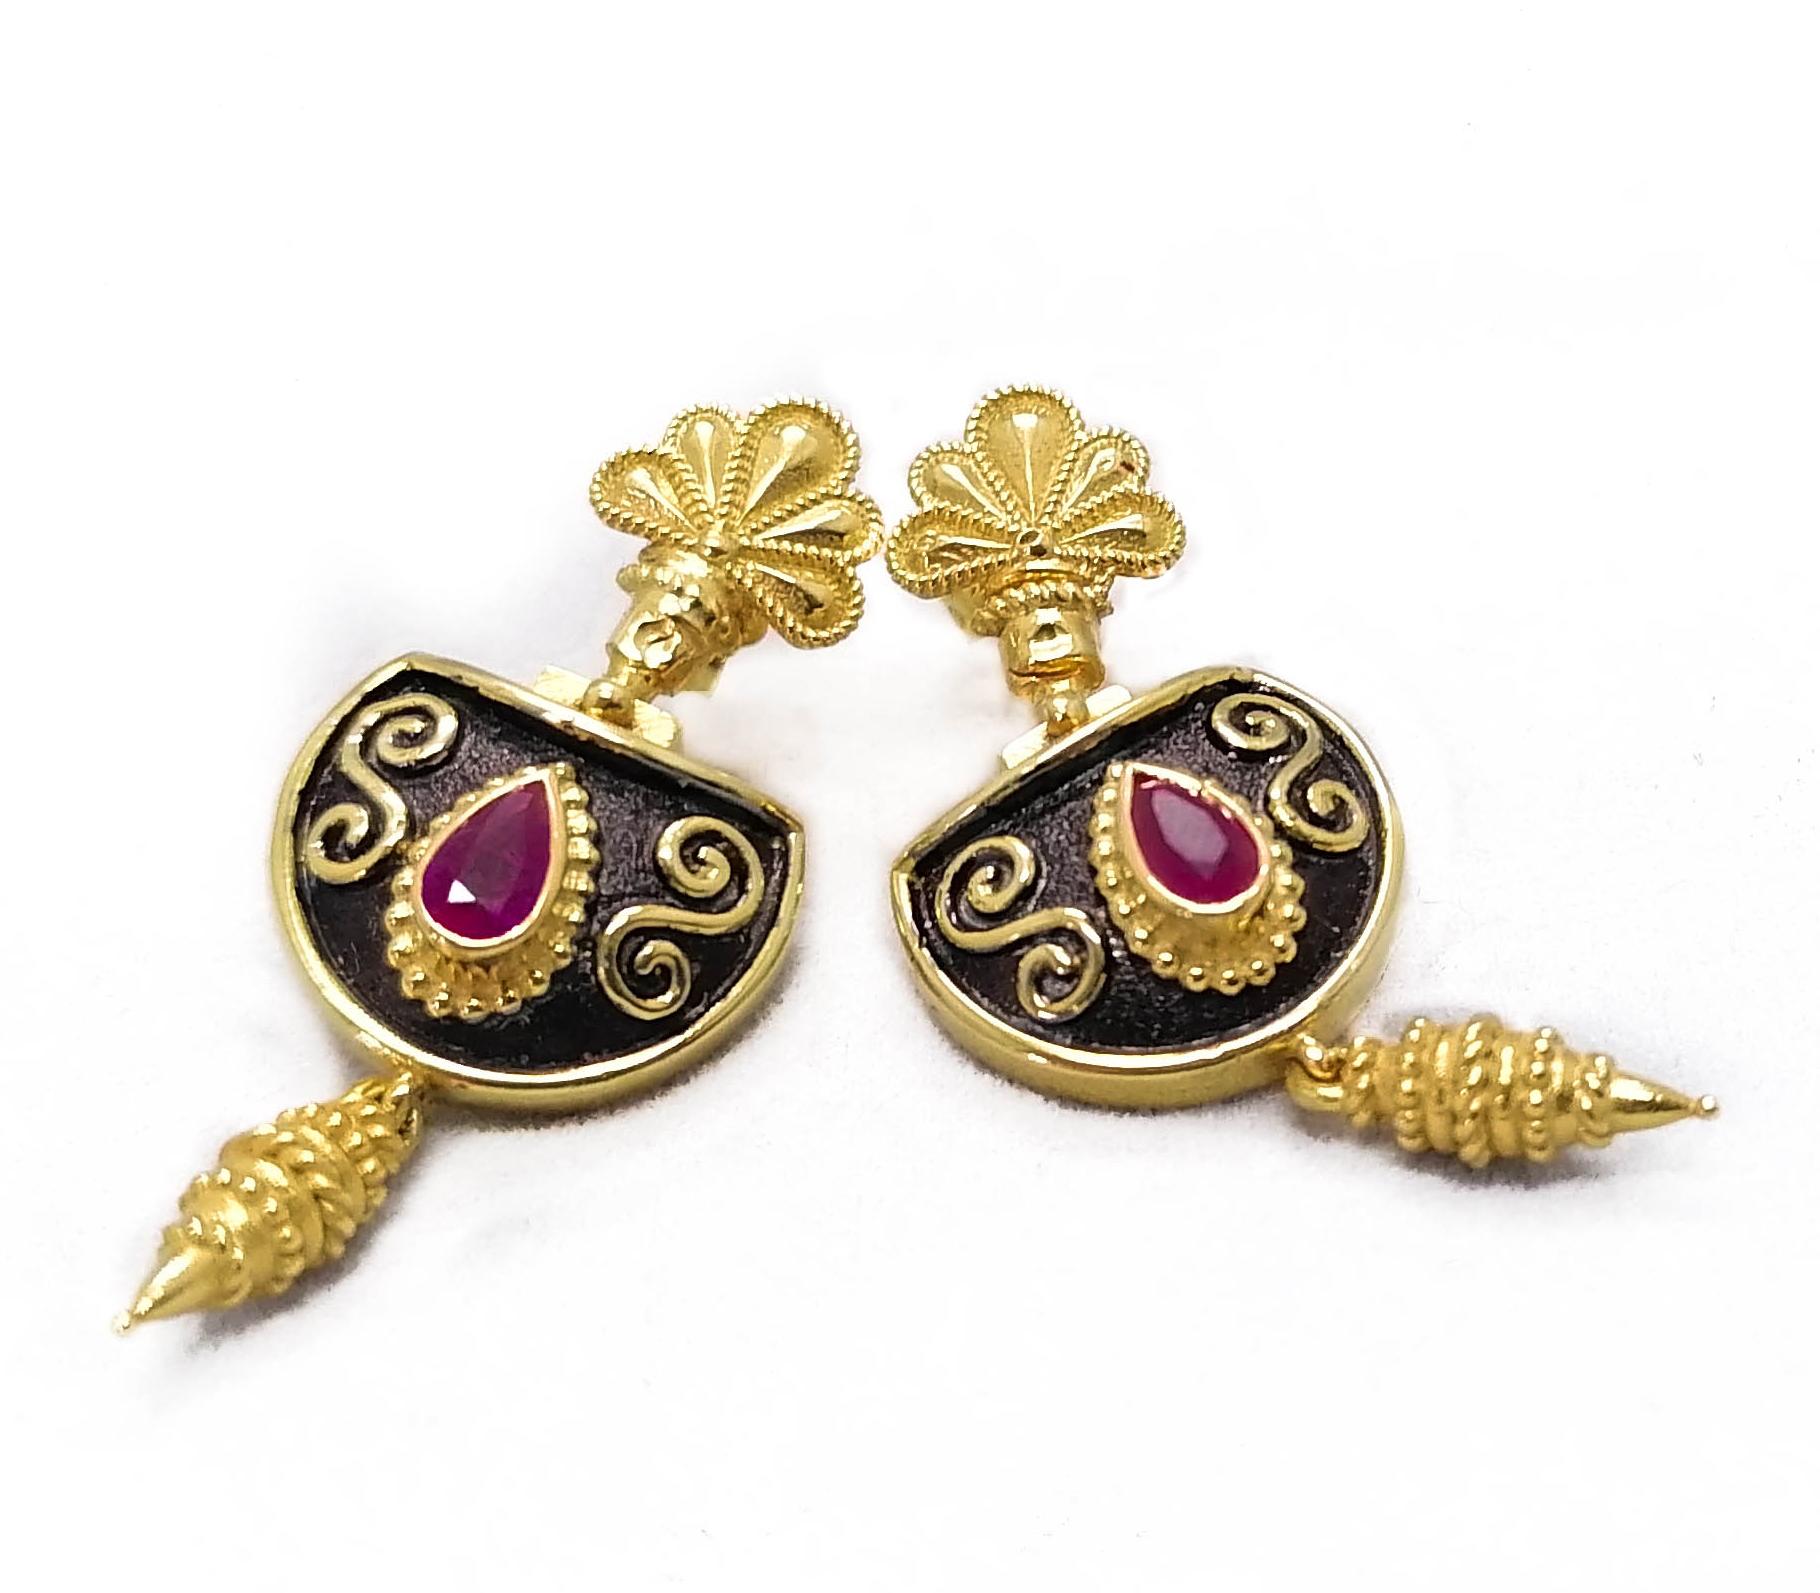 These S.Georgios designer drop earrings are hand made from 18 Karat Yellow Gold and decorated with Byzantine-era style granulation workmanship which is done microscopically. These gorgeous drop earrings feature 2 teardrop natural Rubies total weight